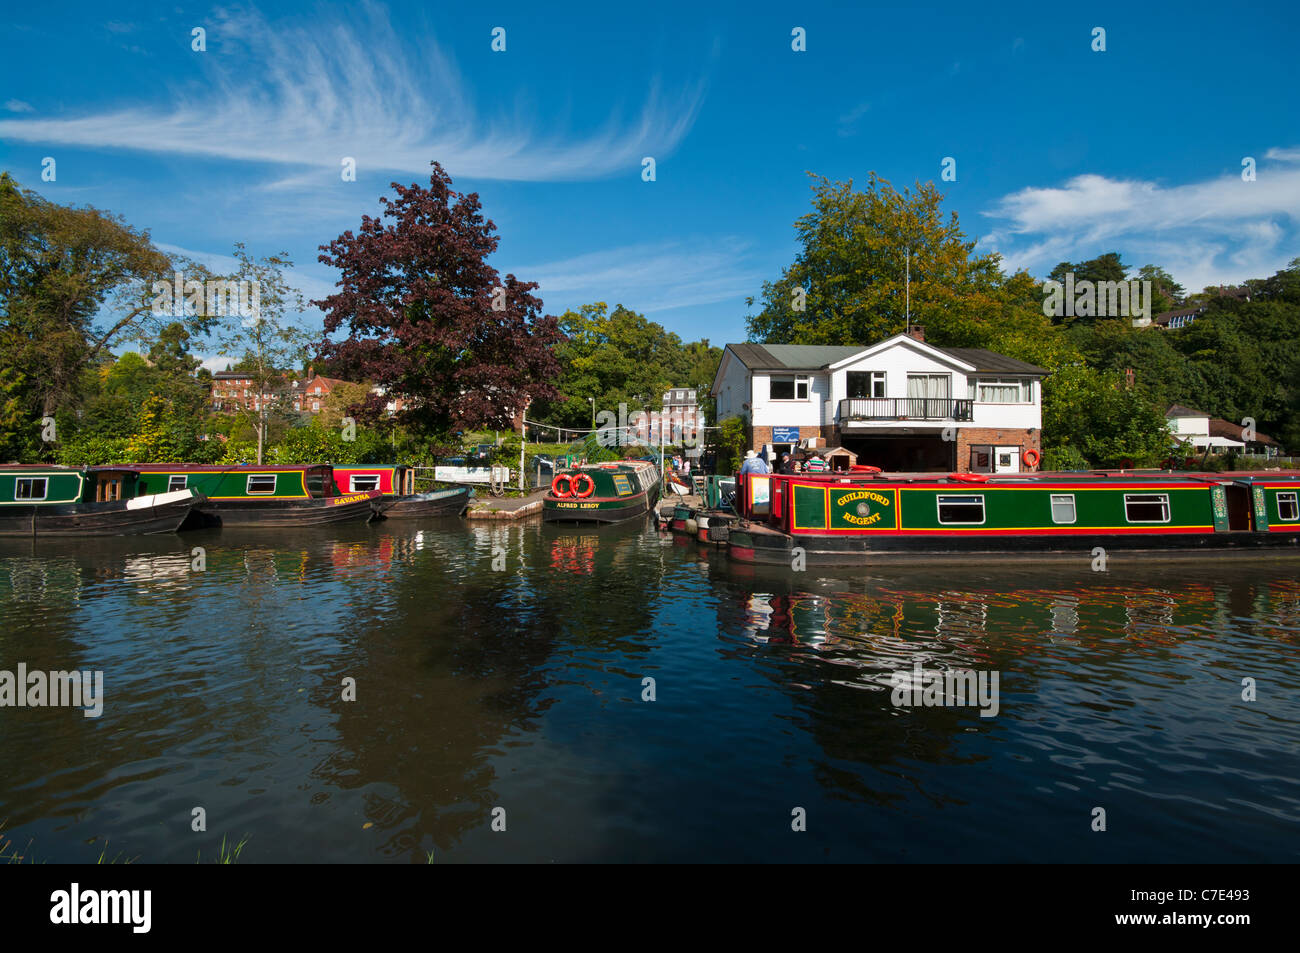 Canal Narrow Boats Narrowboats Moored By The Boathouse On The River Wey Guildford Surrey England UK Stock Photo